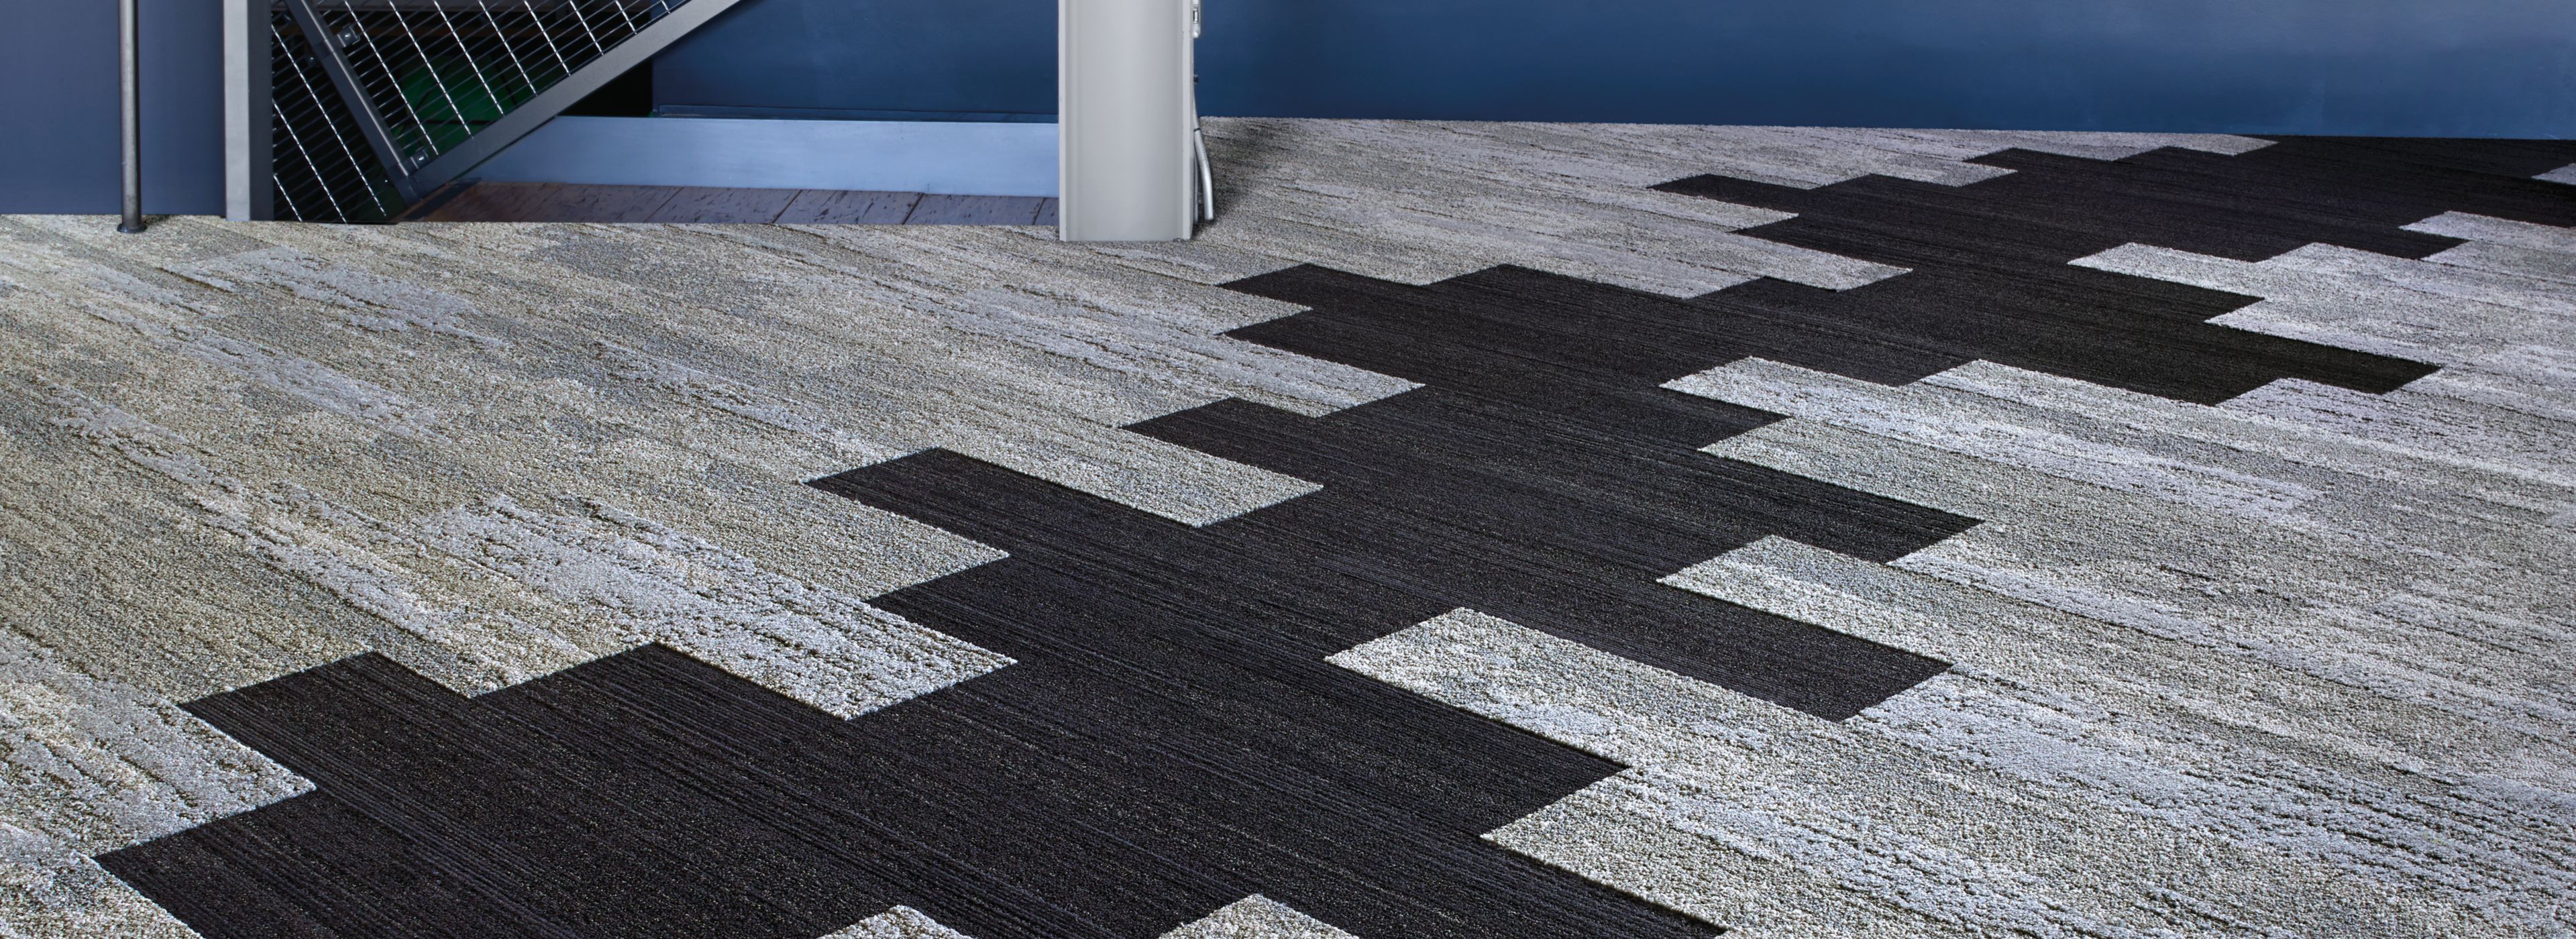 Interface NF400 and NF401 plank carpet tile in a corridor or entryway of a public space imagen número 1